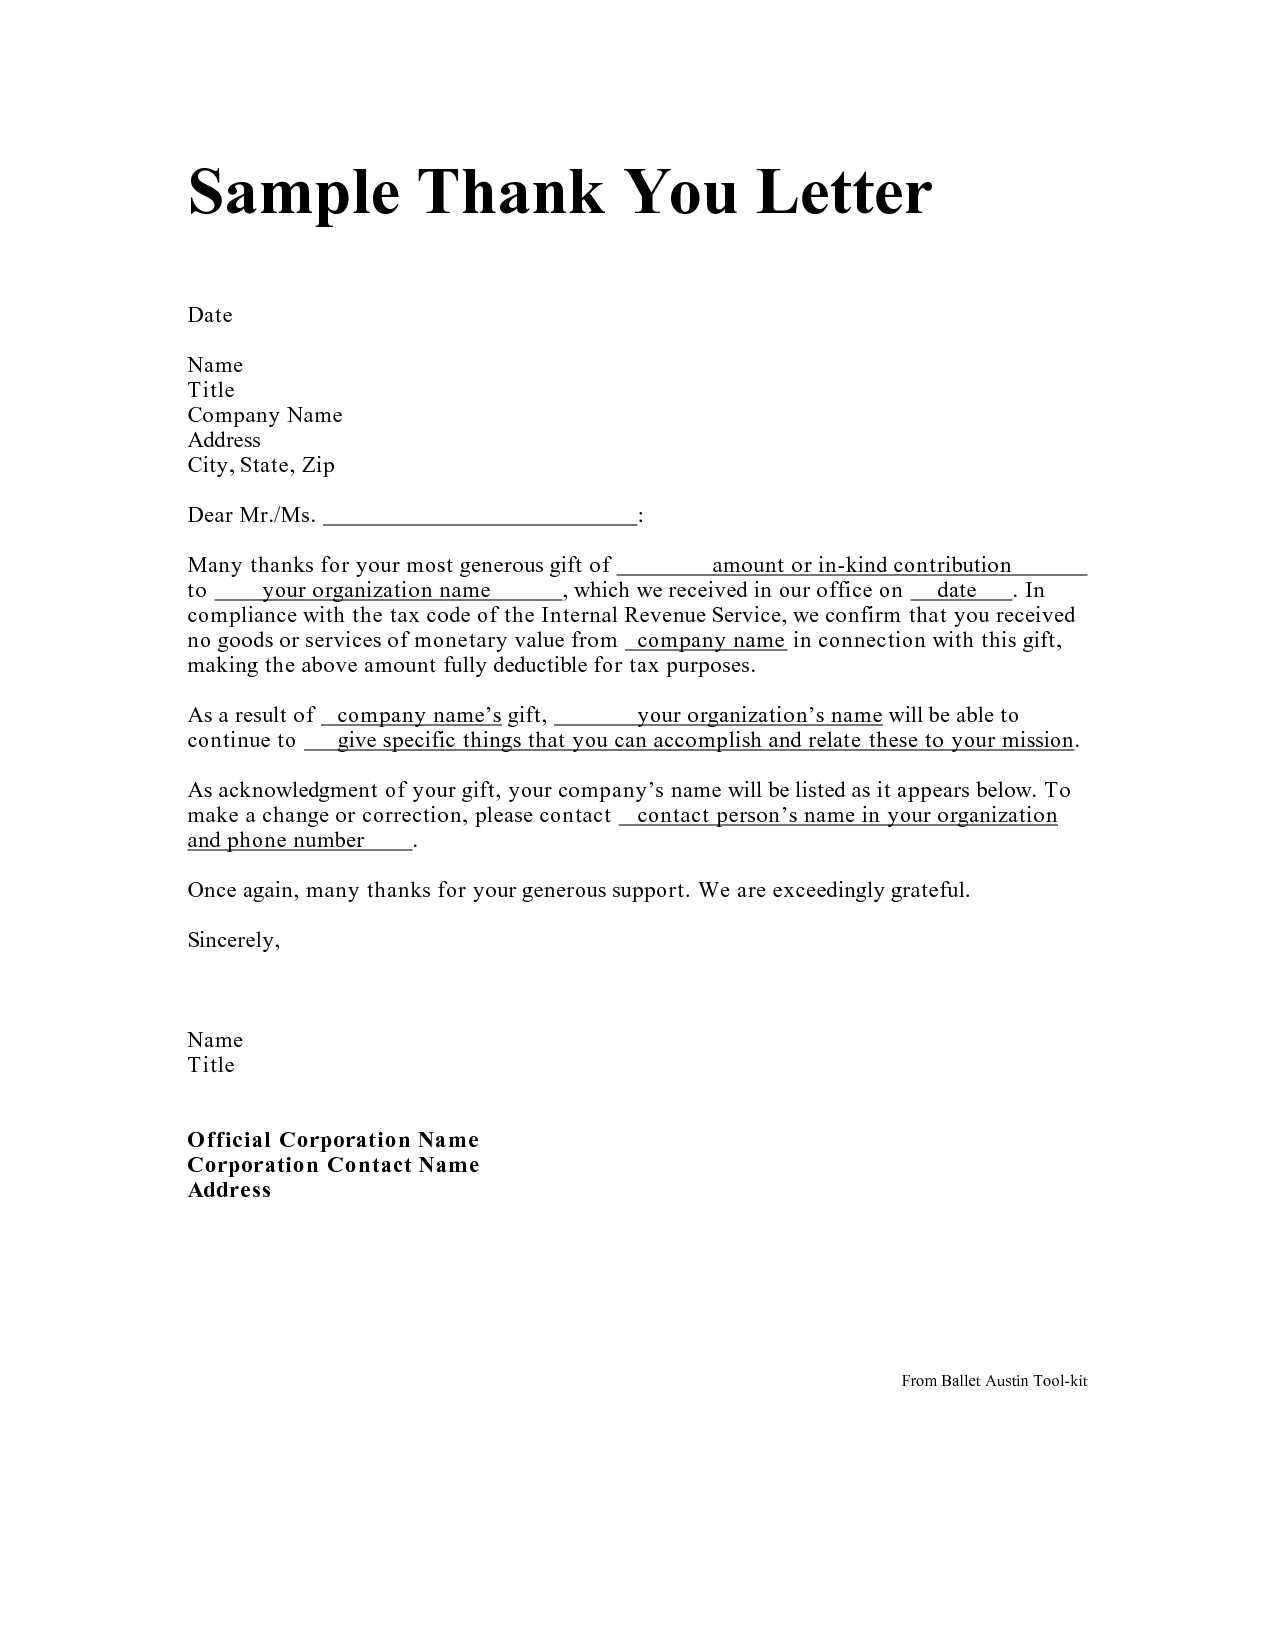 Text Annotation Worksheet as Well as Writing A Thank You Digest